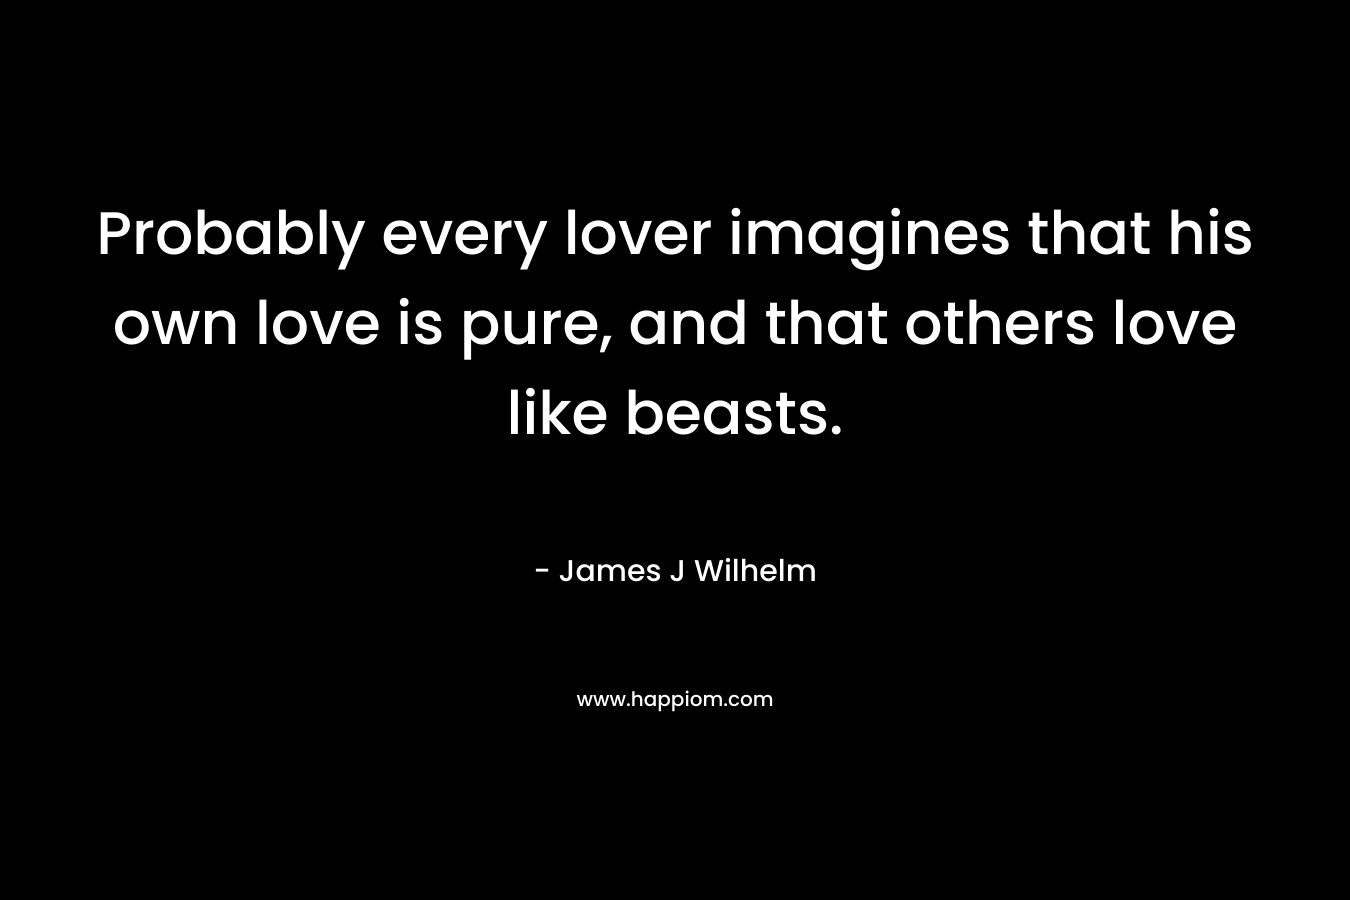 Probably every lover imagines that his own love is pure, and that others love like beasts. – James J Wilhelm